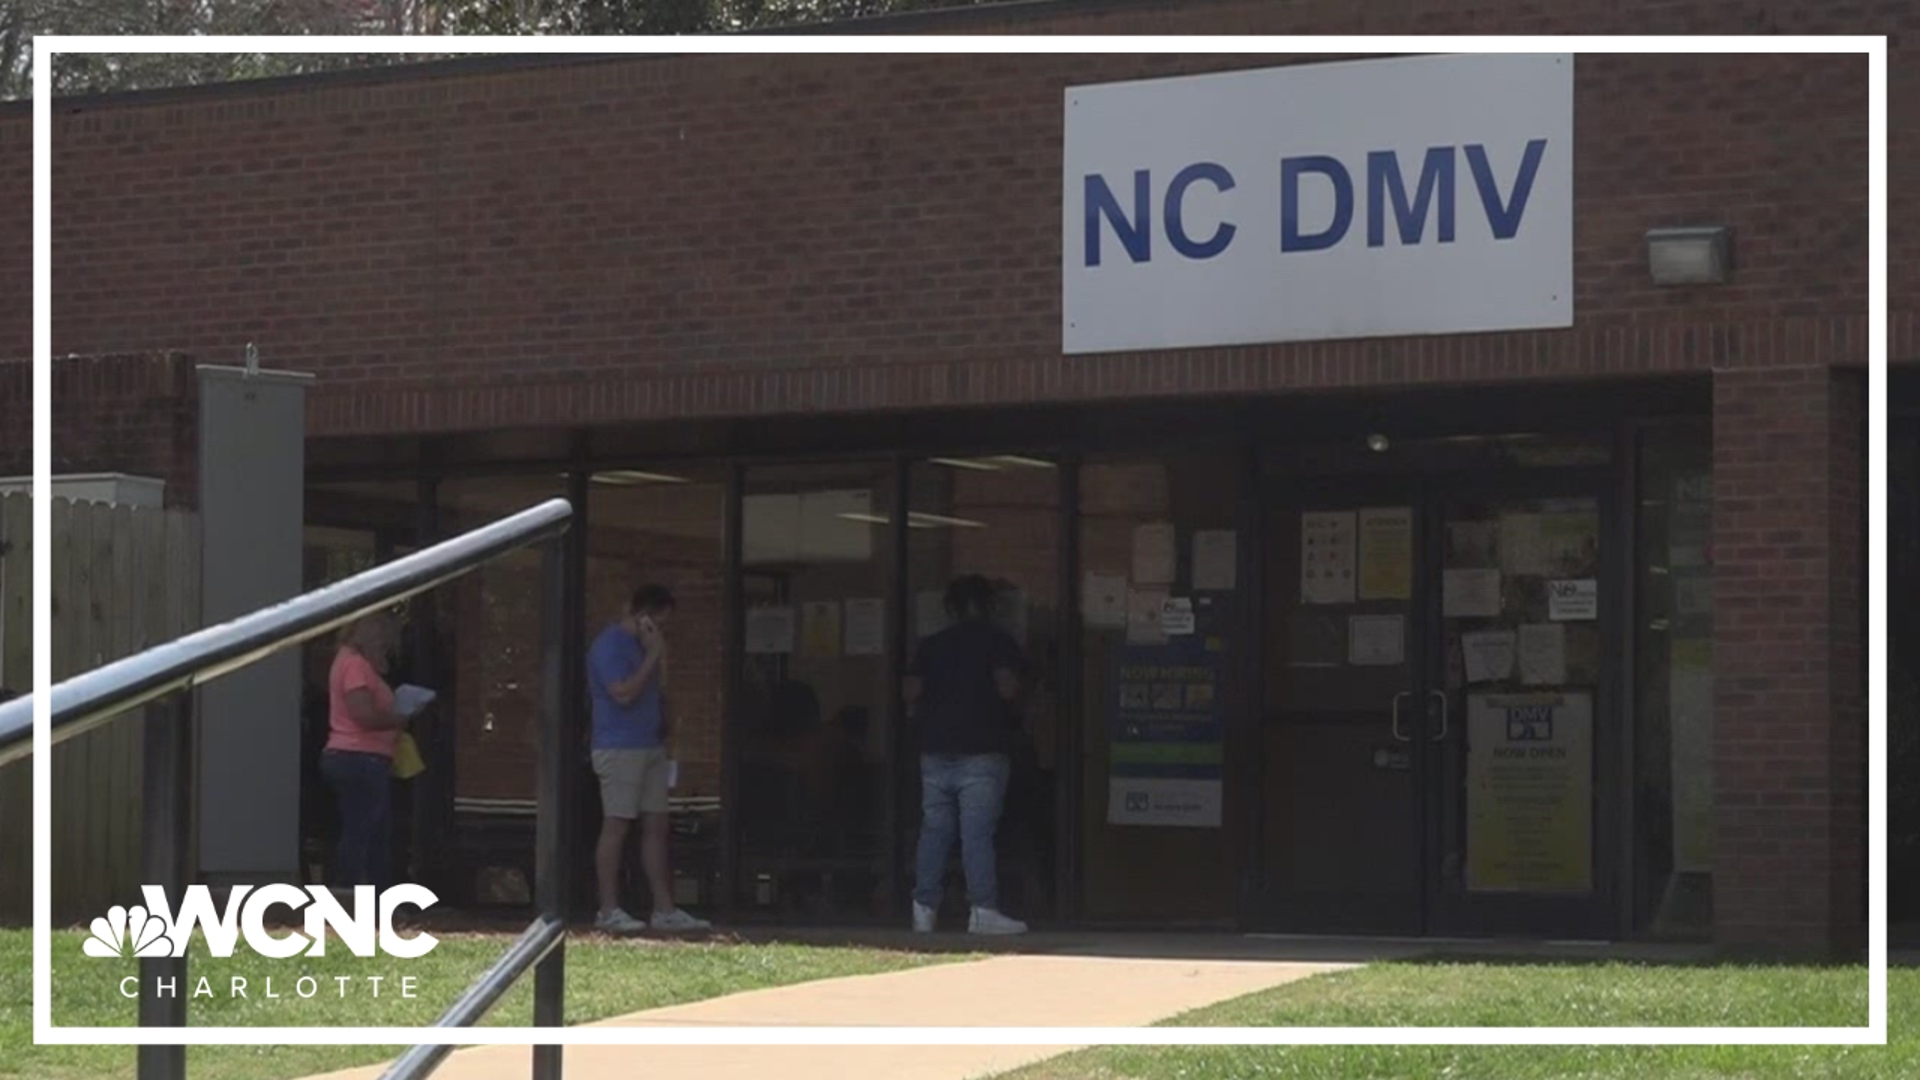 The NCDMV issues a temporary paper ID, which is only valid for 60 days and isn't acceptable for voting.